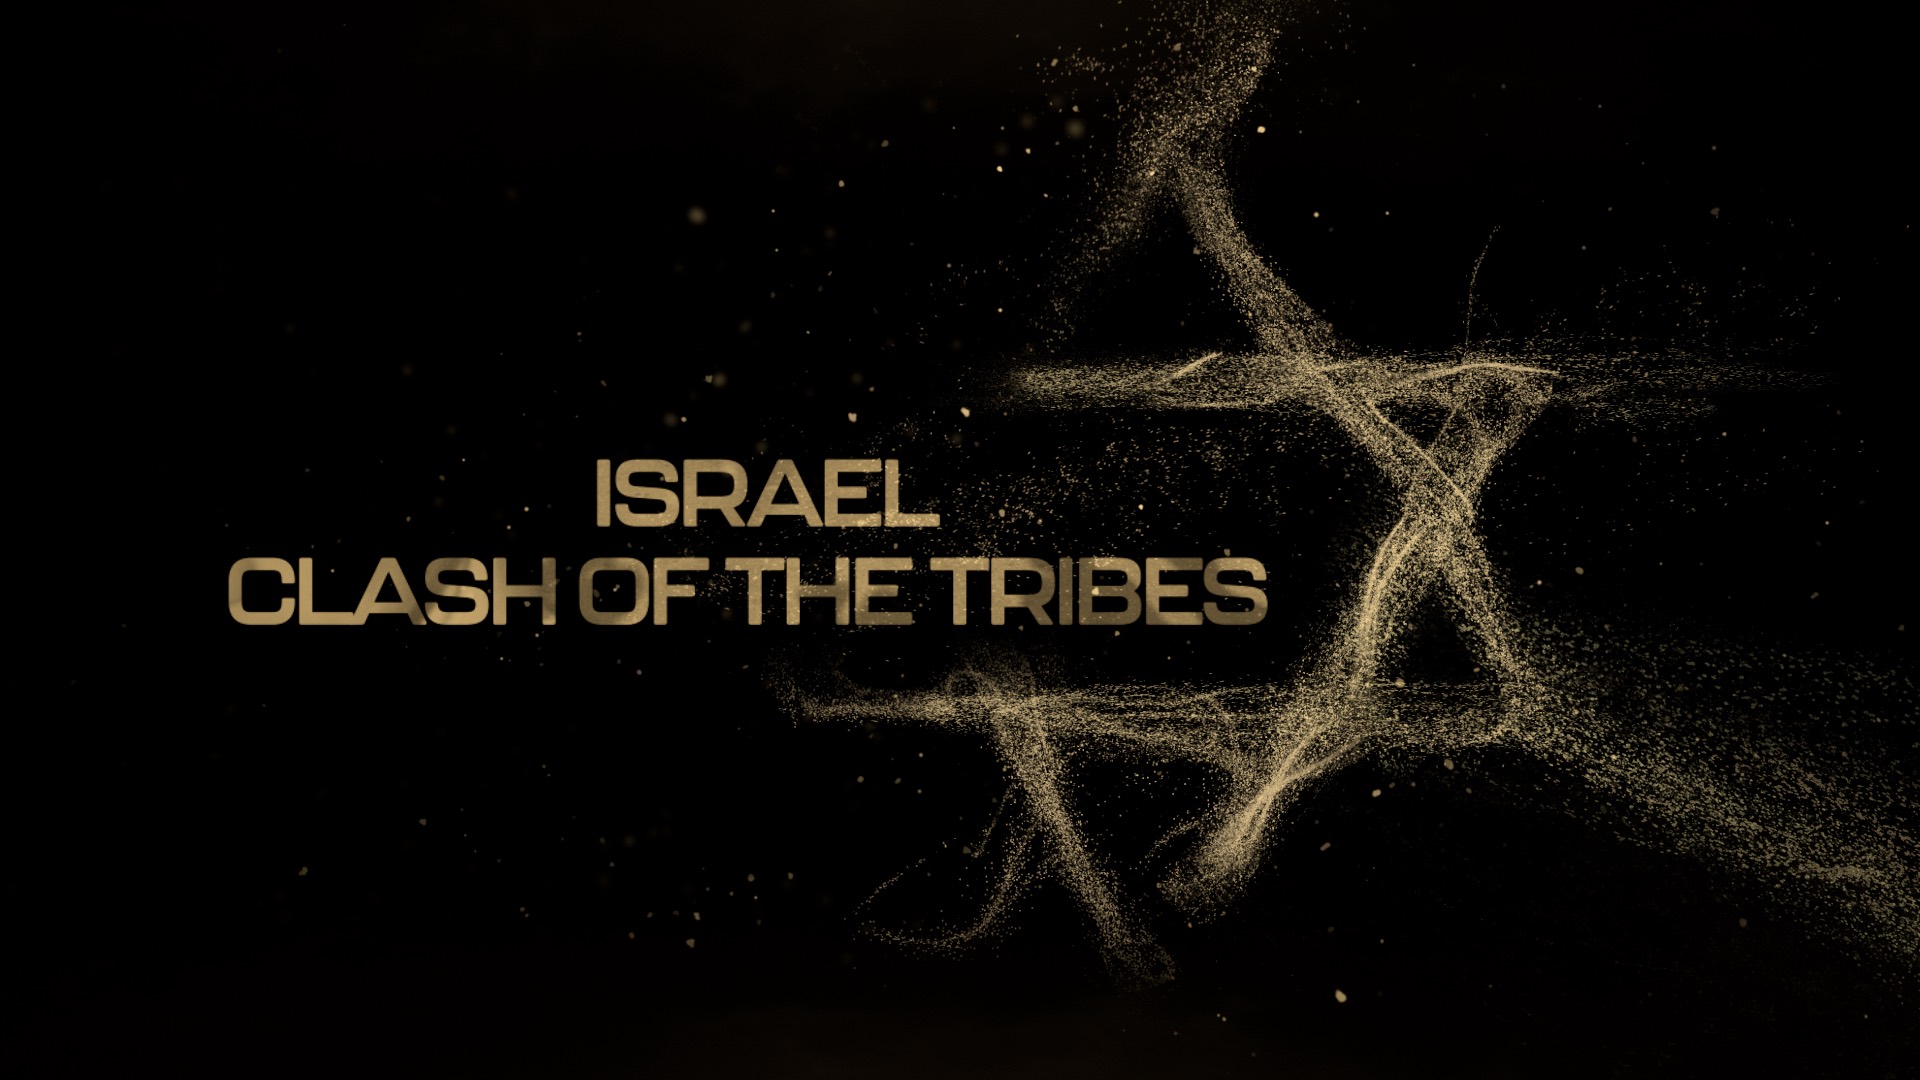 Israel – Clash of the Tribes